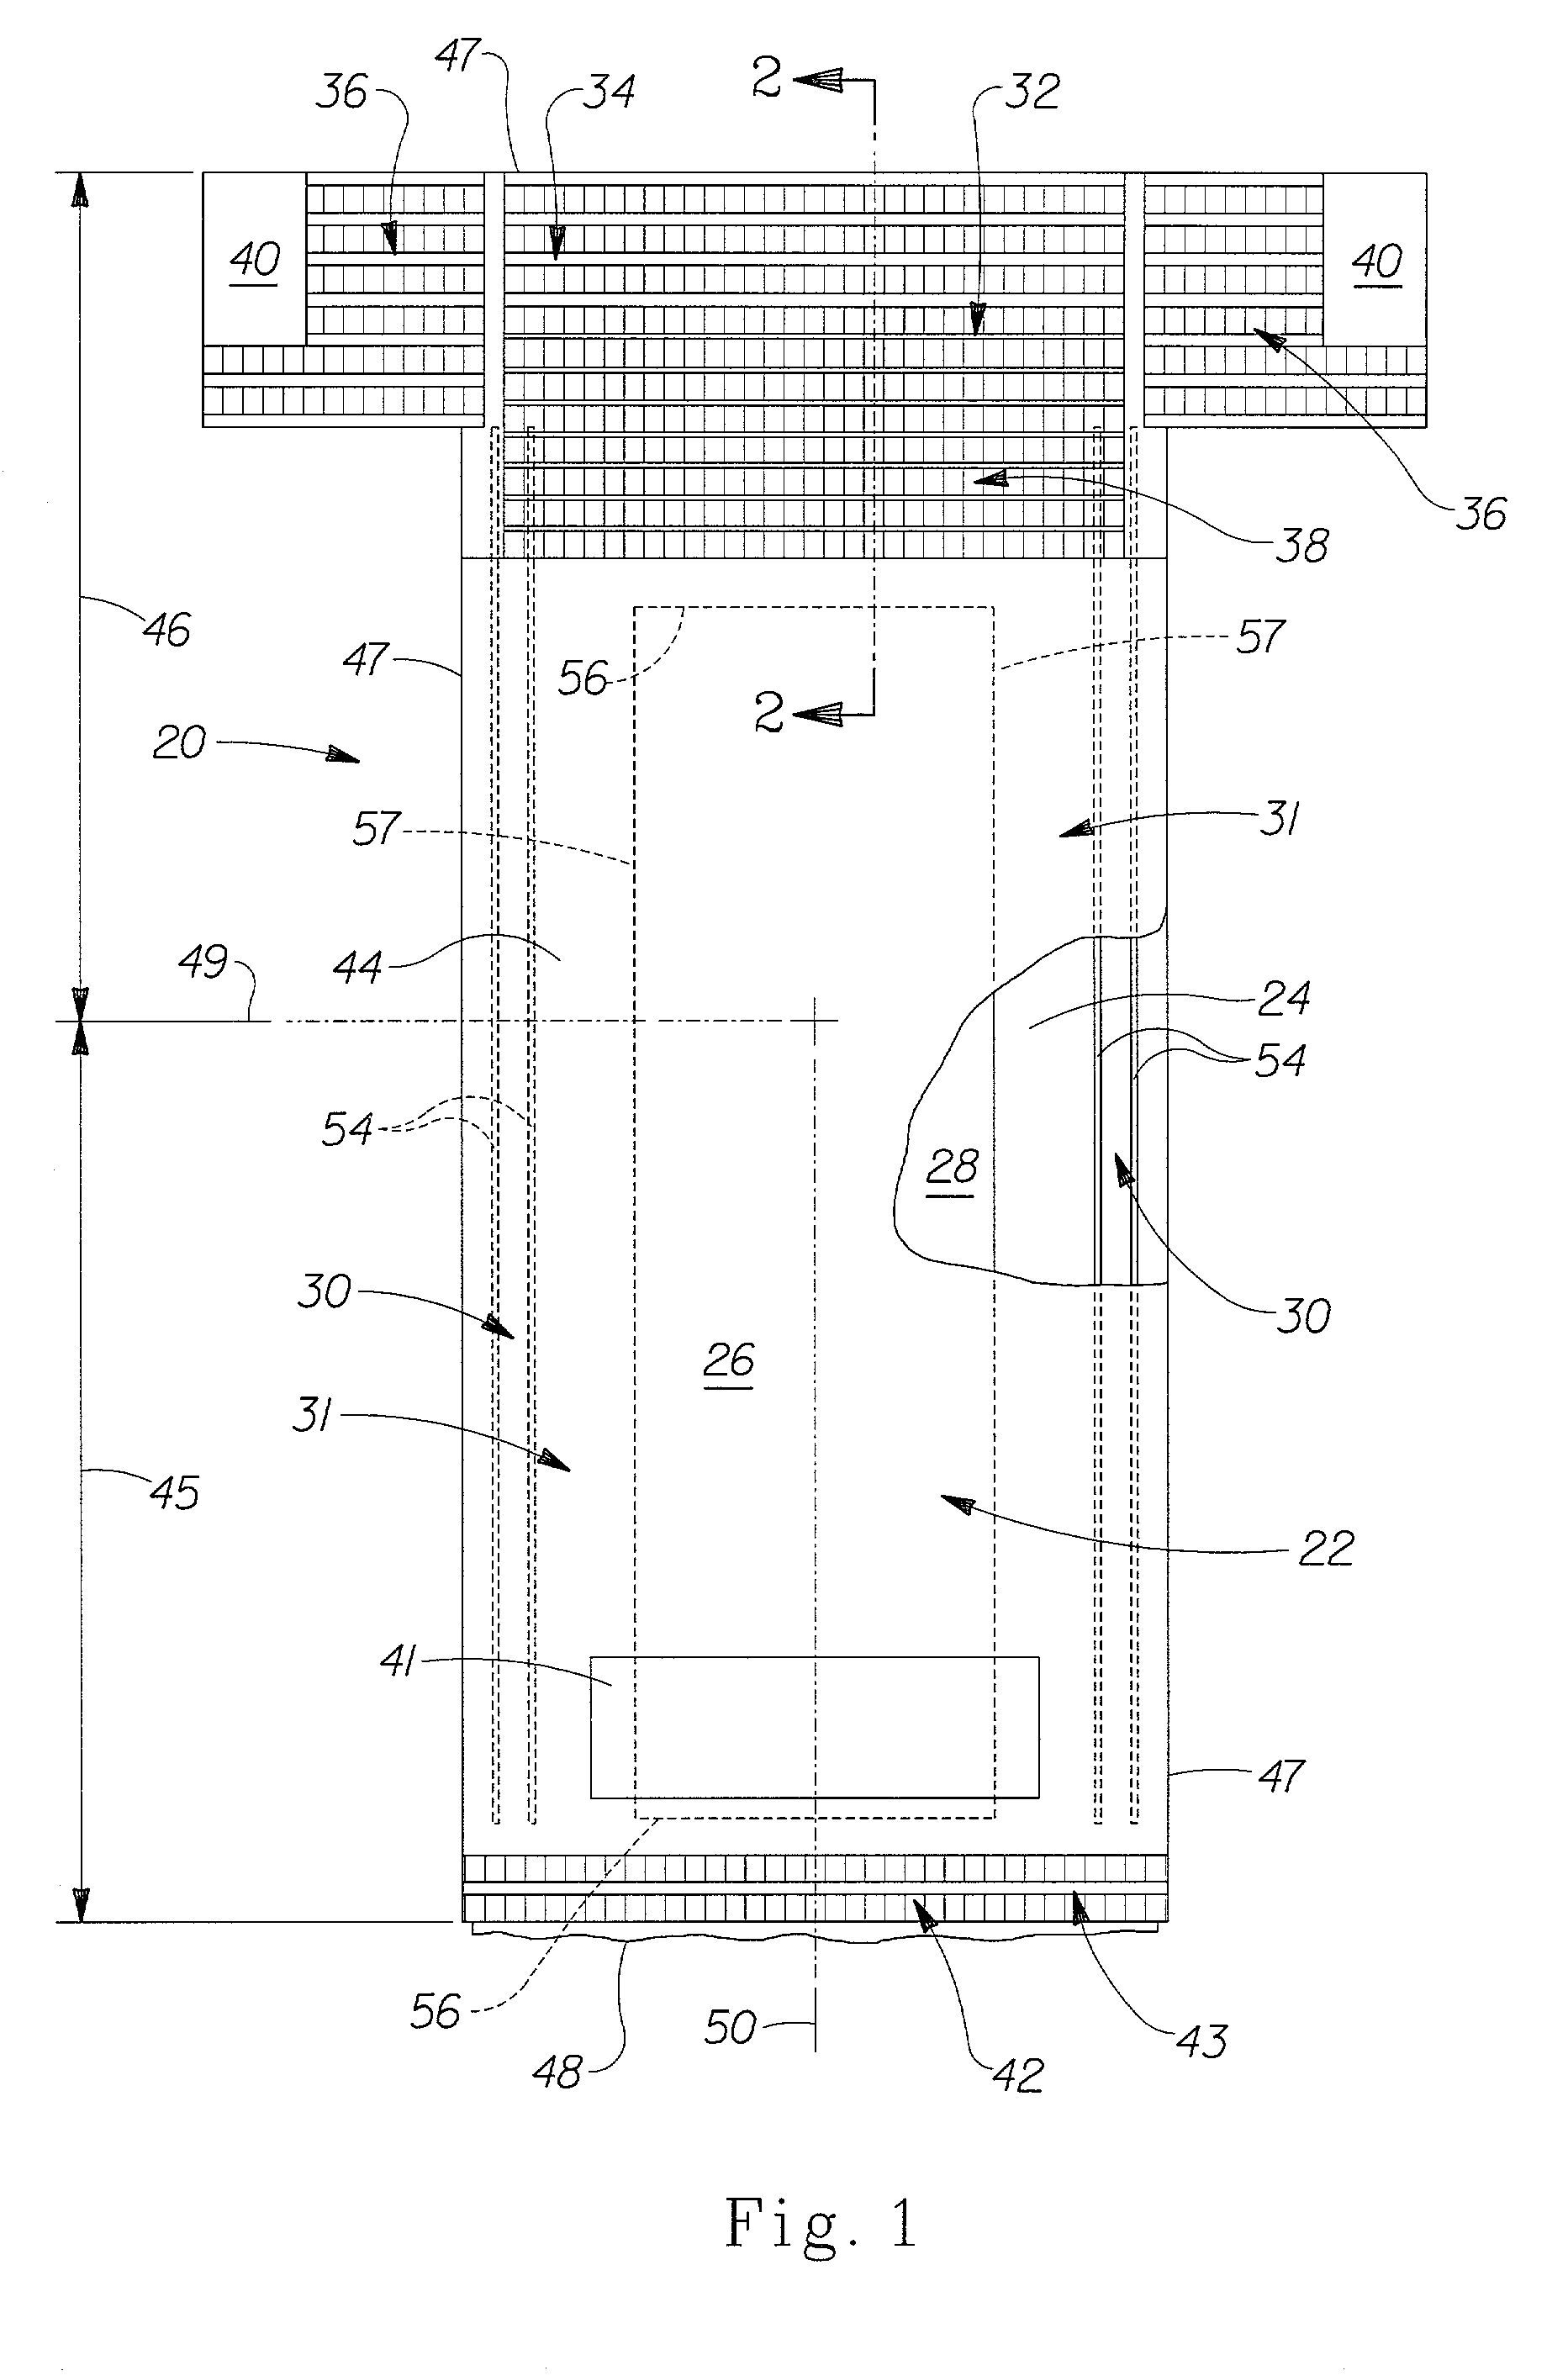 Absorbent article with multiple zone structural elastic-like film web extensible waist feature